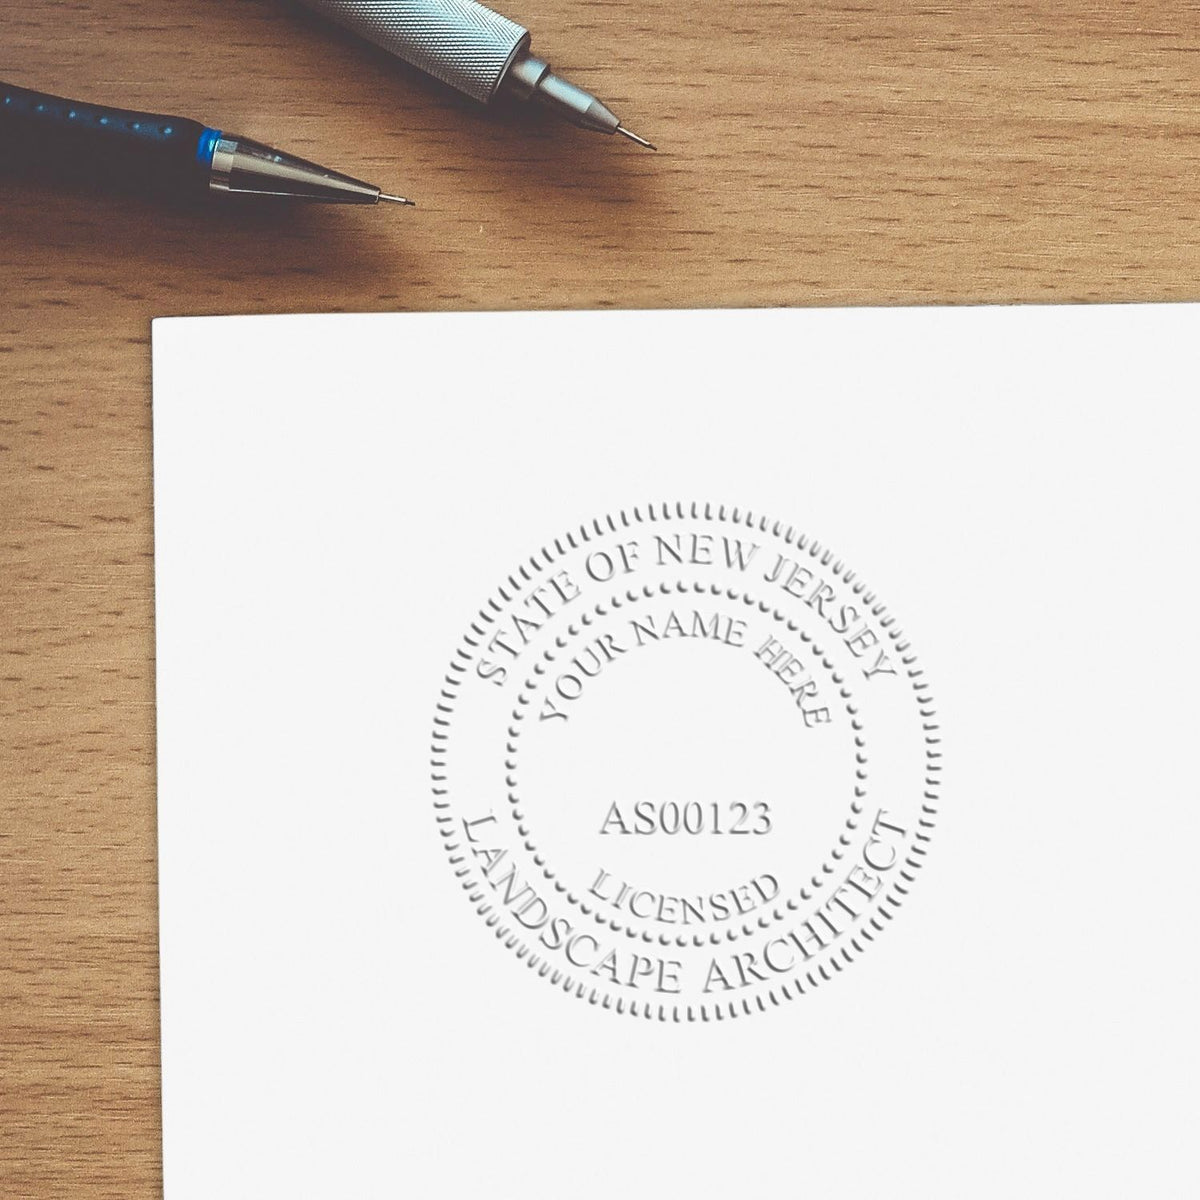 Another Example of a stamped impression of the Hybrid New Jersey Landscape Architect Seal on a office form